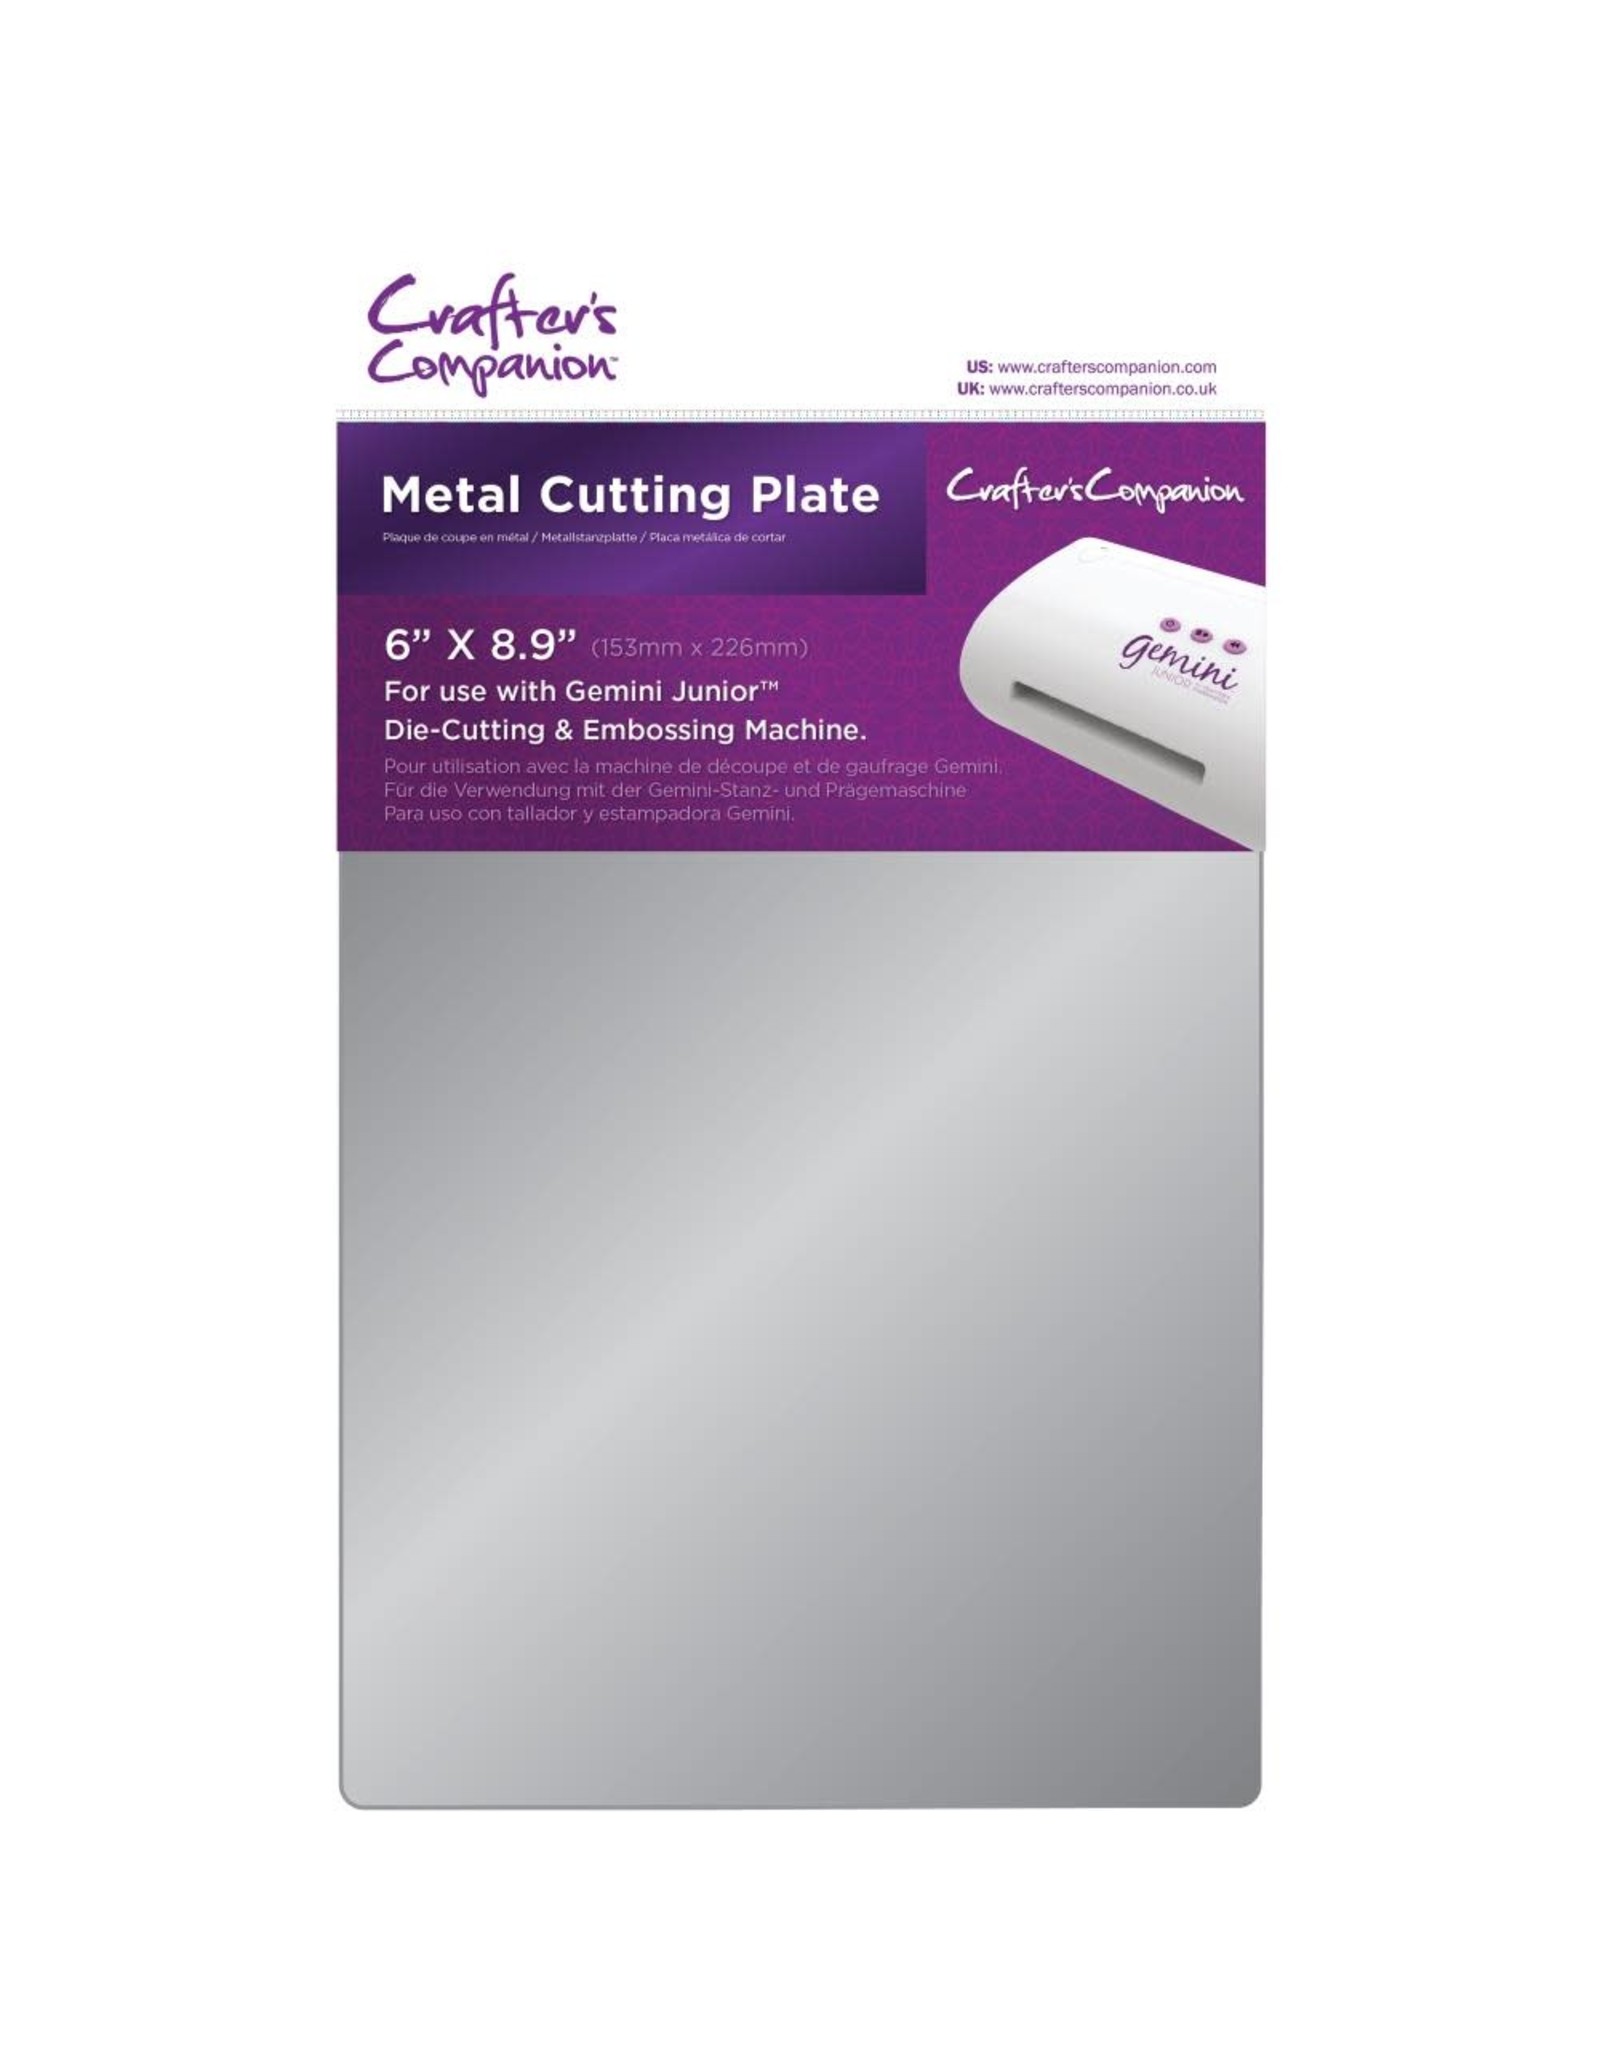 CRAFTERS COMPANION CRAFTER'S COMPANION METAL CUTTING PLATE FOR GEMINI JUNIOR 6"X8.9"